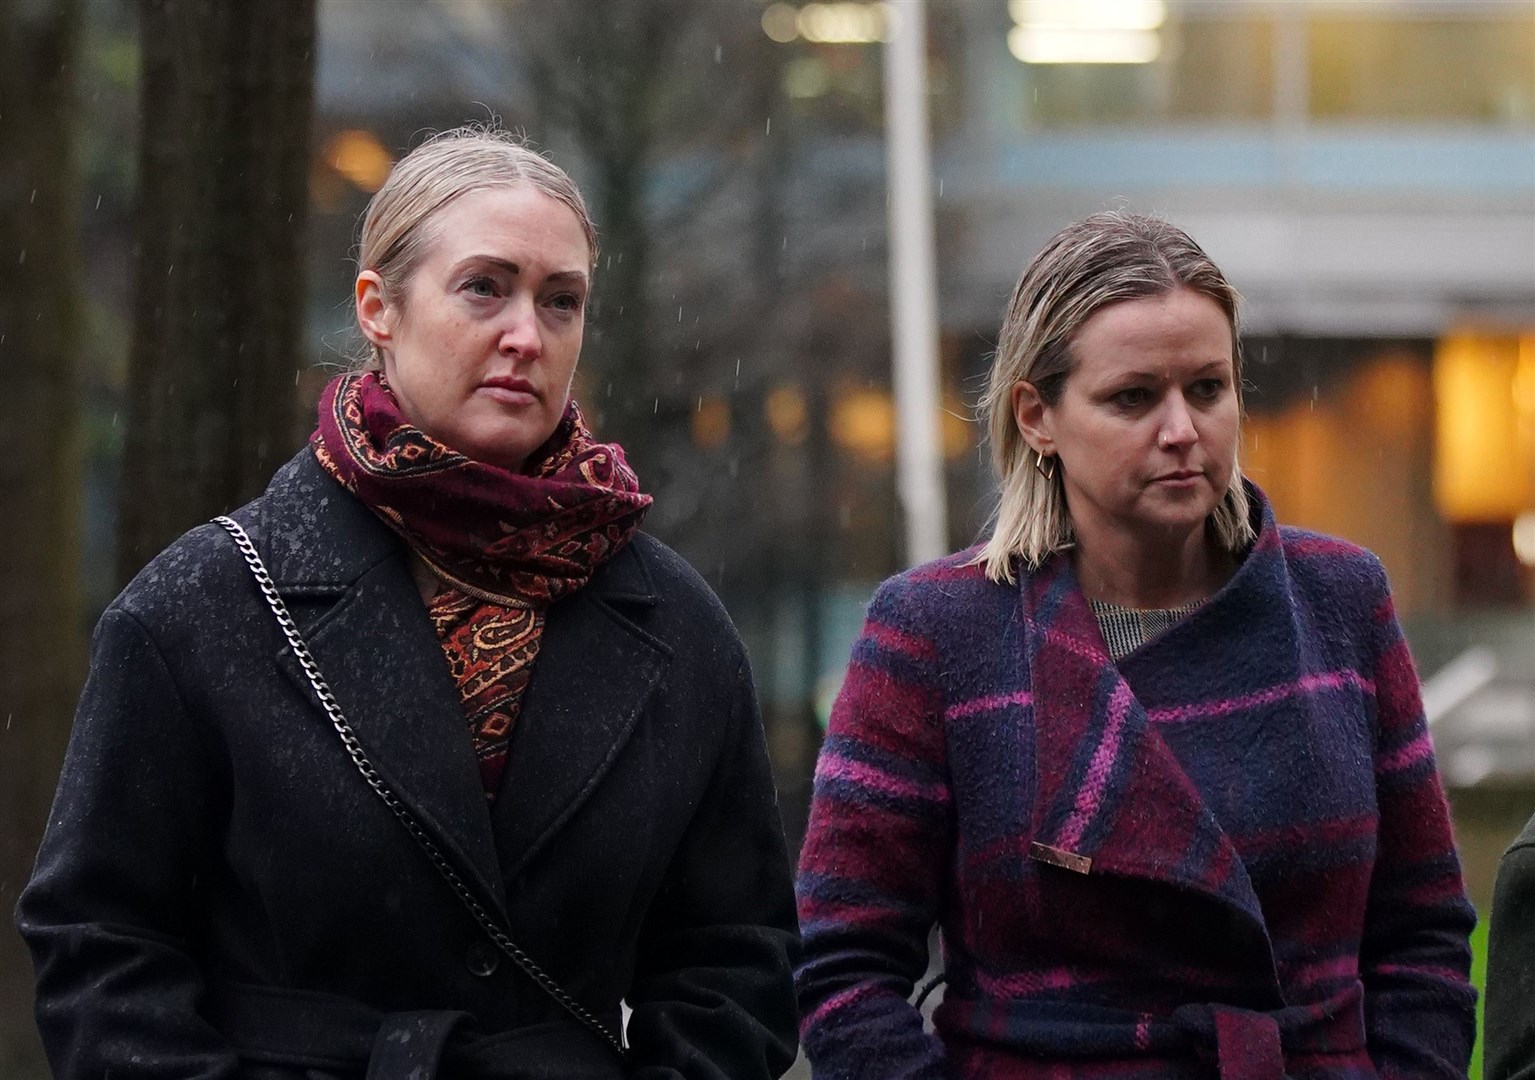 Brianna Ghey’s mother Esther Ghey, left, and sister Alisha Ghey arriving at Manchester Crown Court (Peter Byrne/PA)